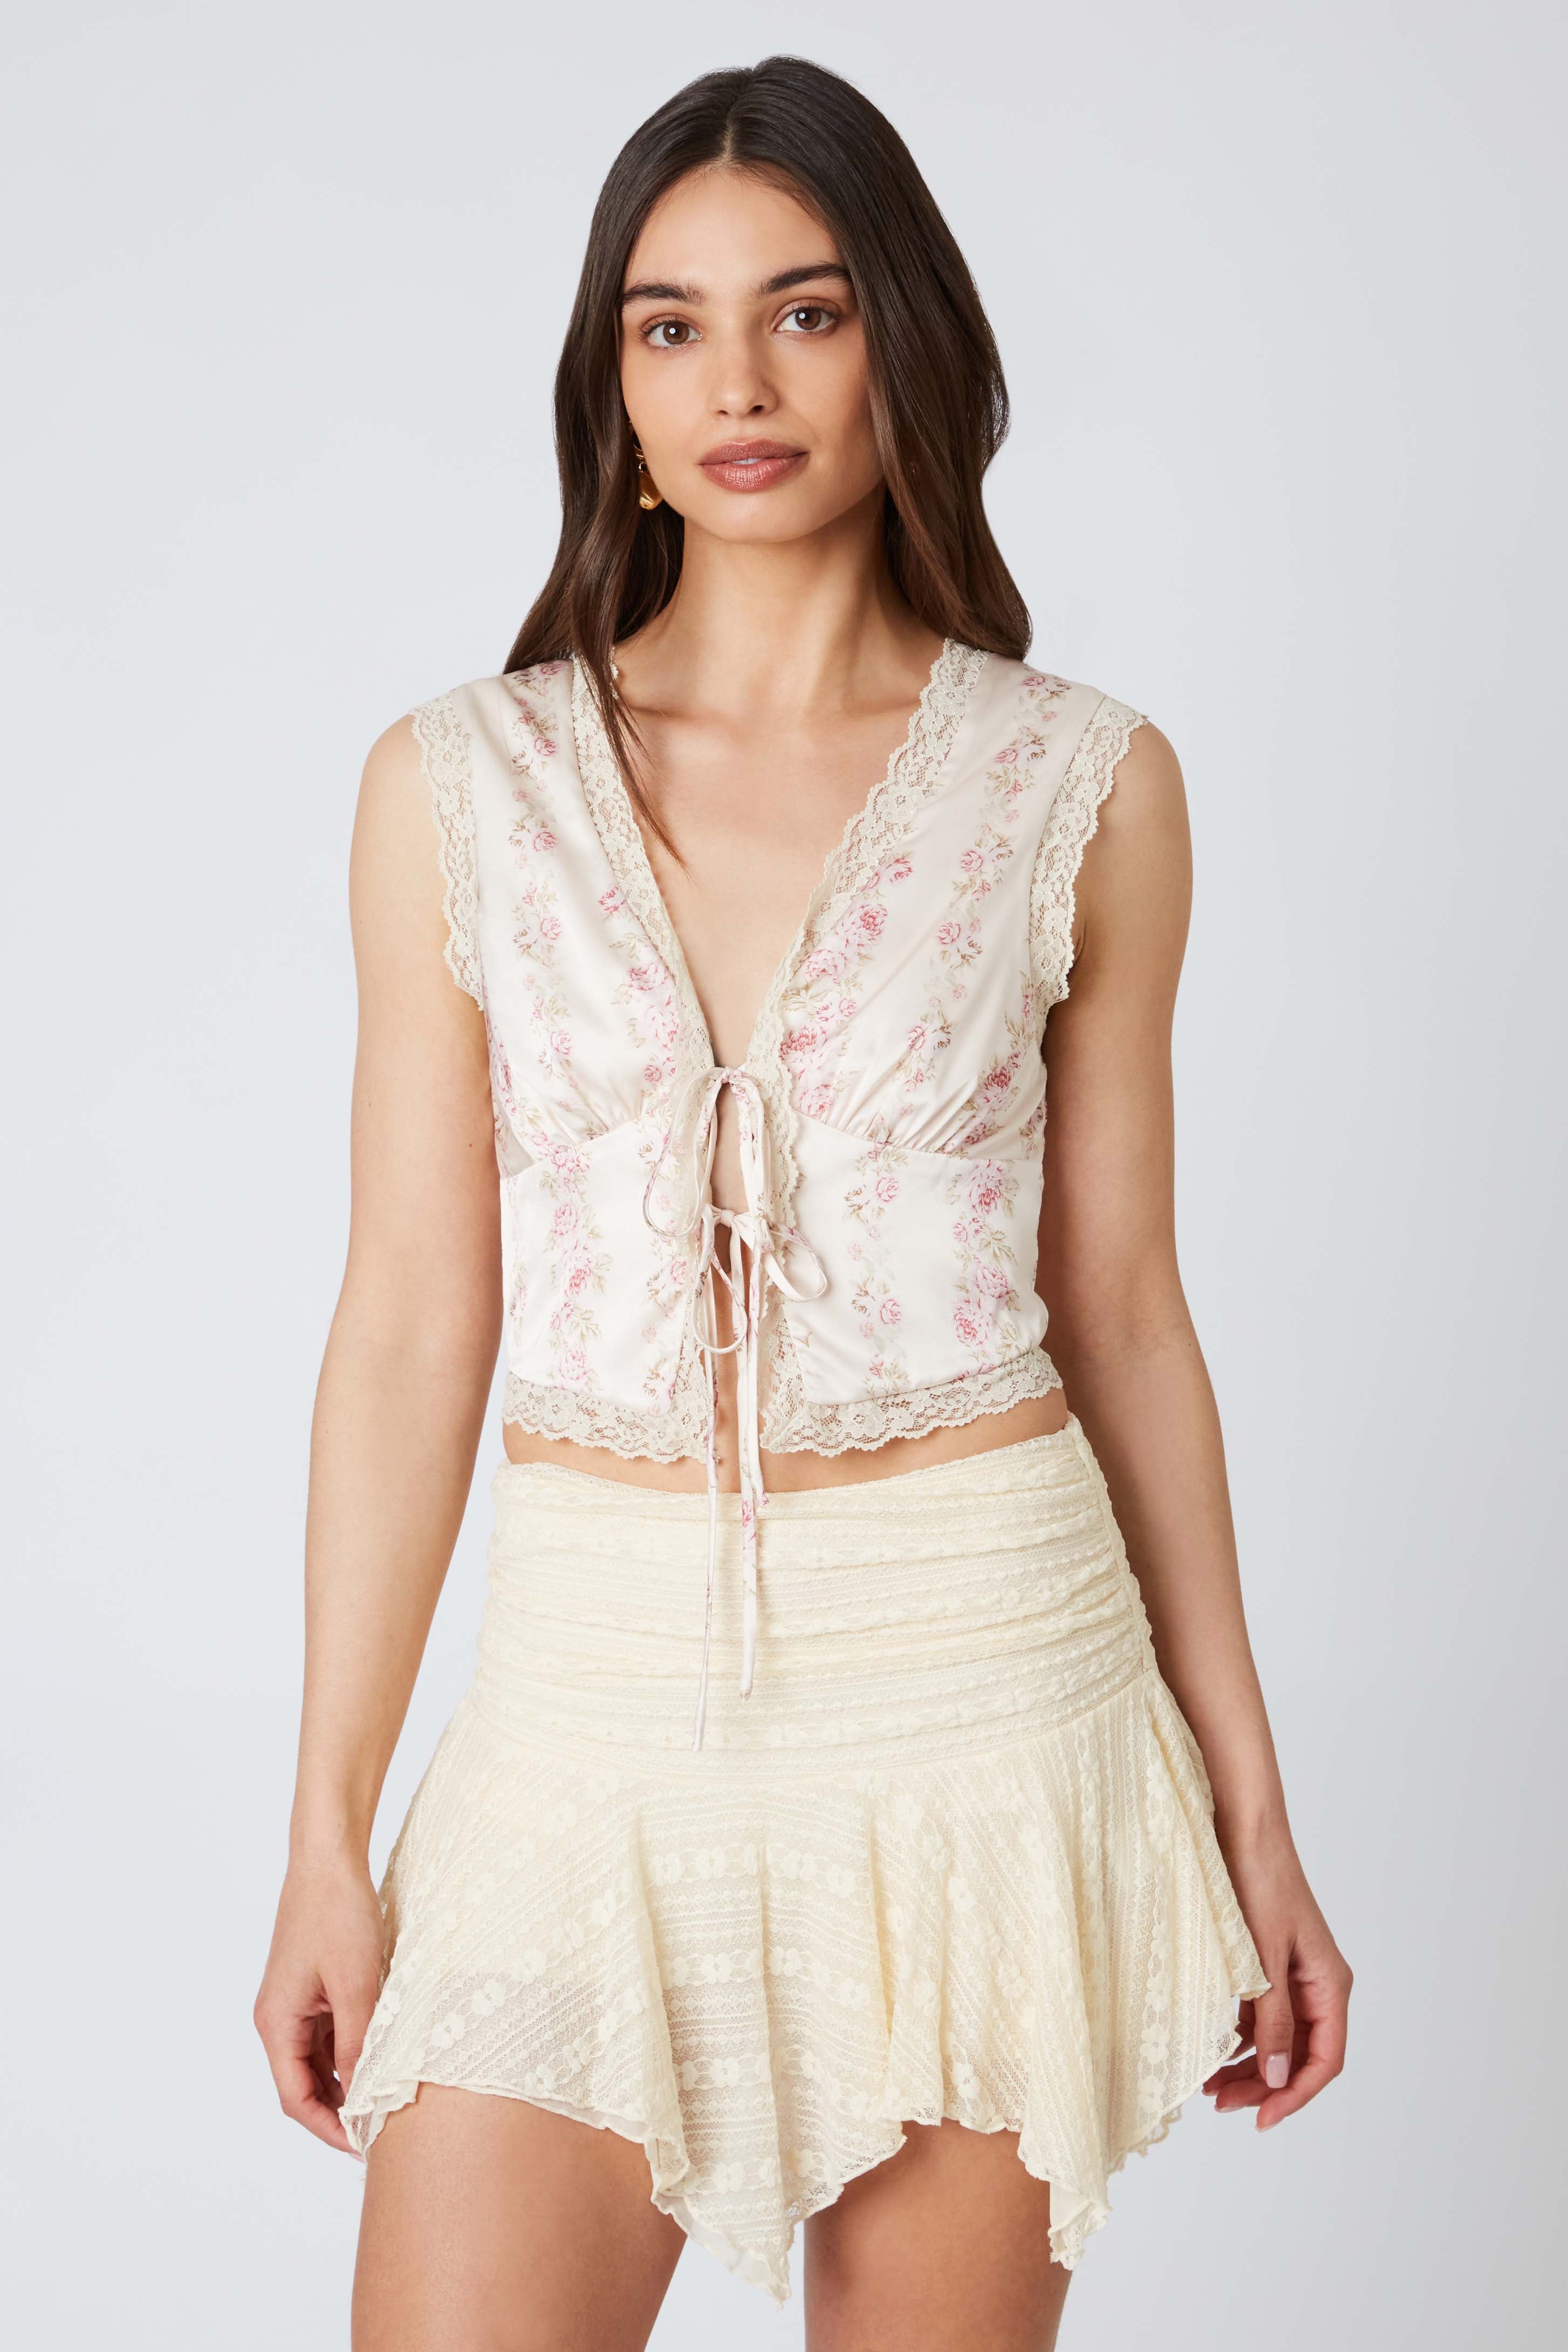 Satin Floral Print Tie Up Top in Apricot Front View